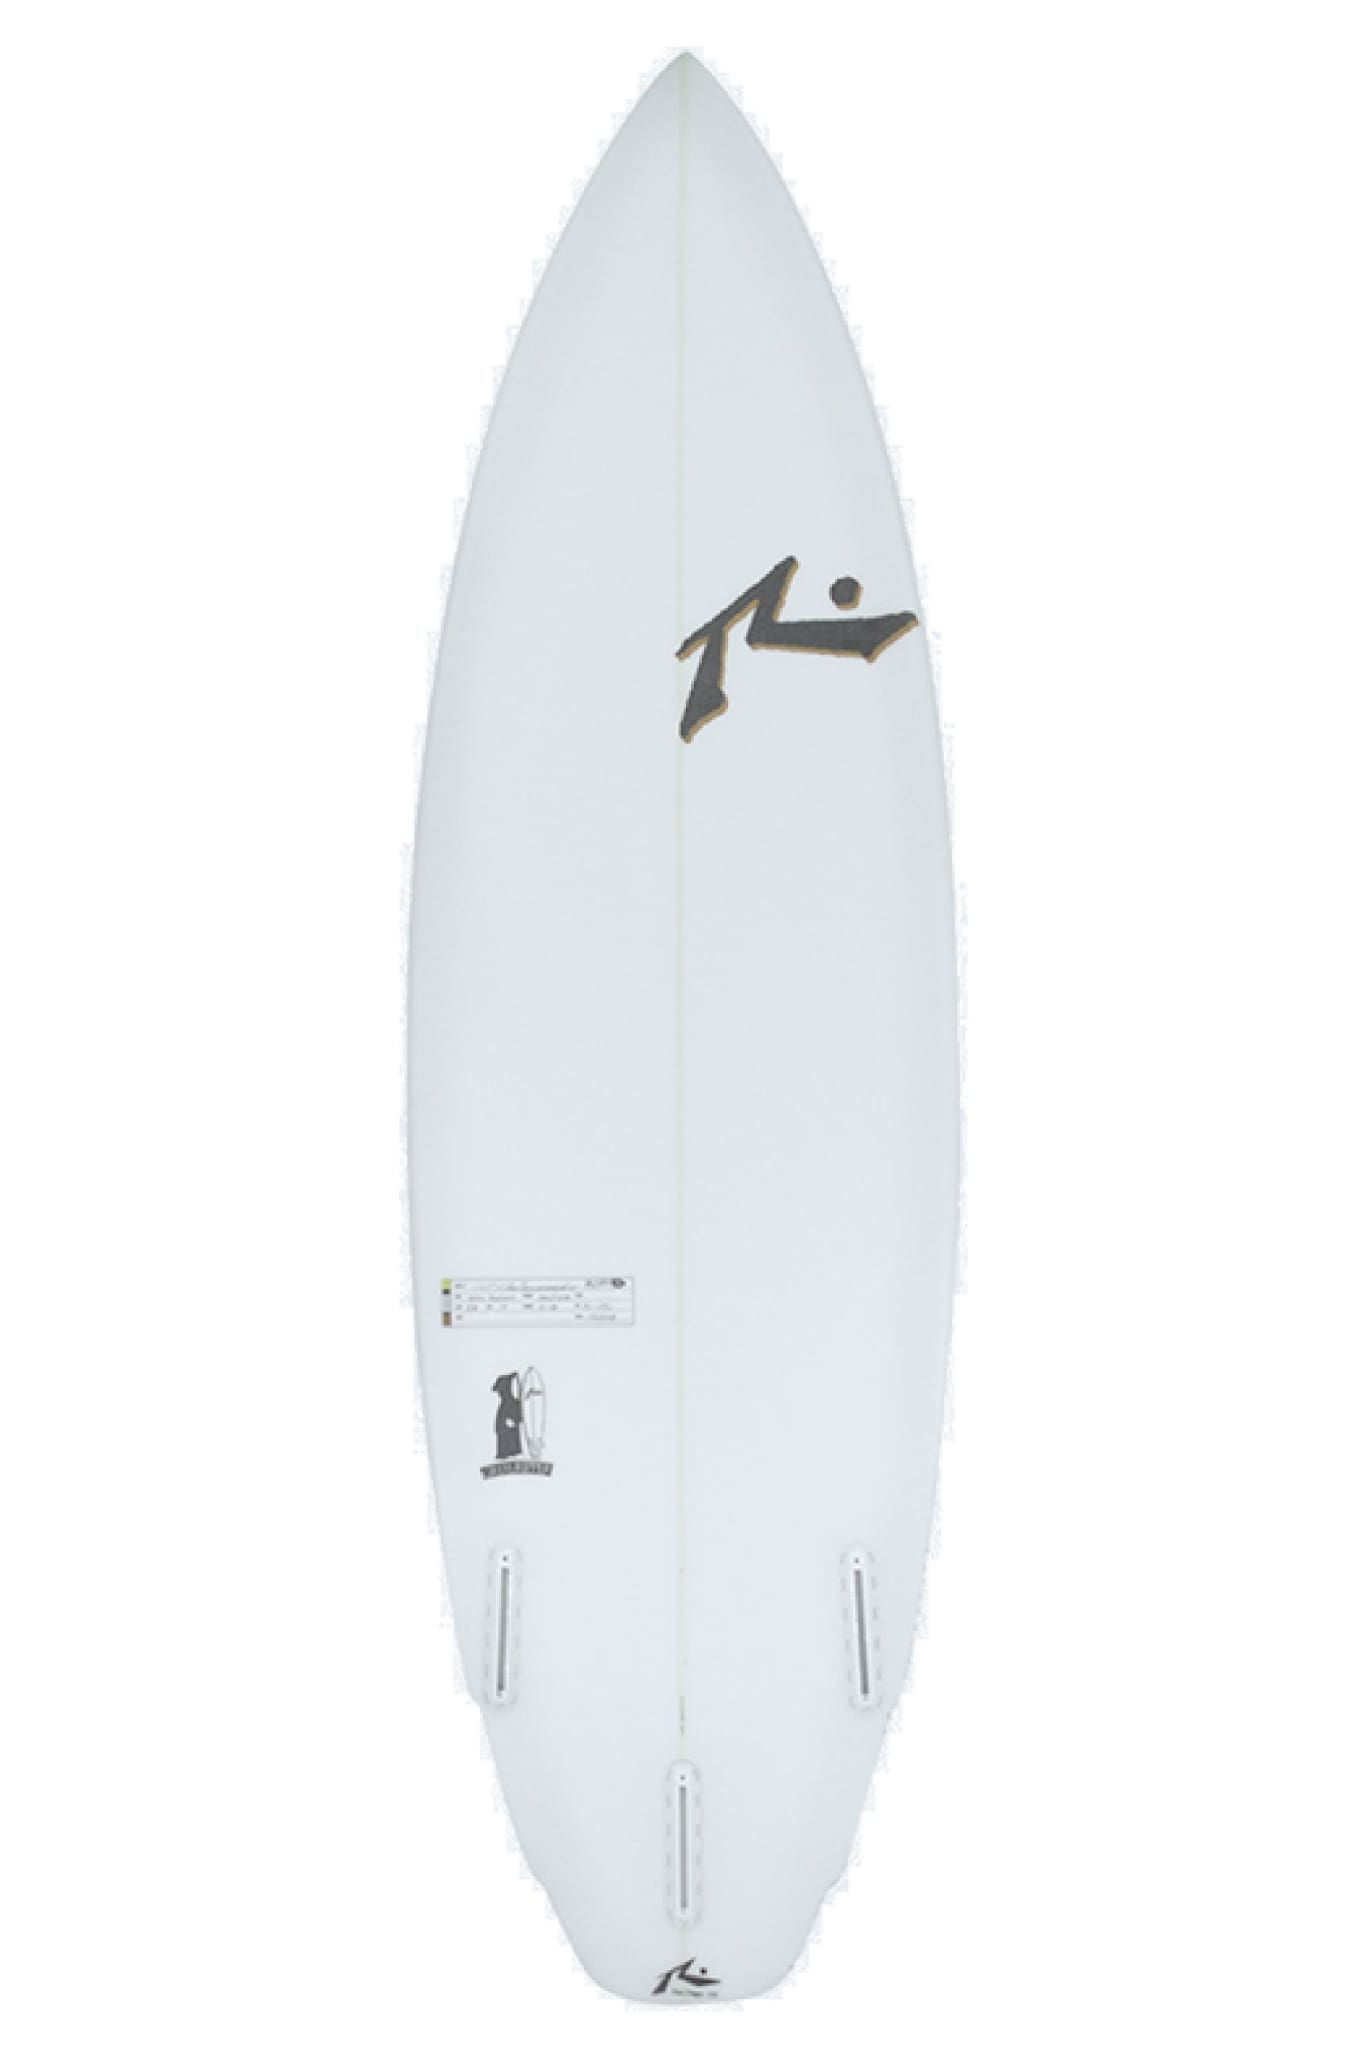 The Grim Ripper | Surfboards-Rusty Surfboards South Africa